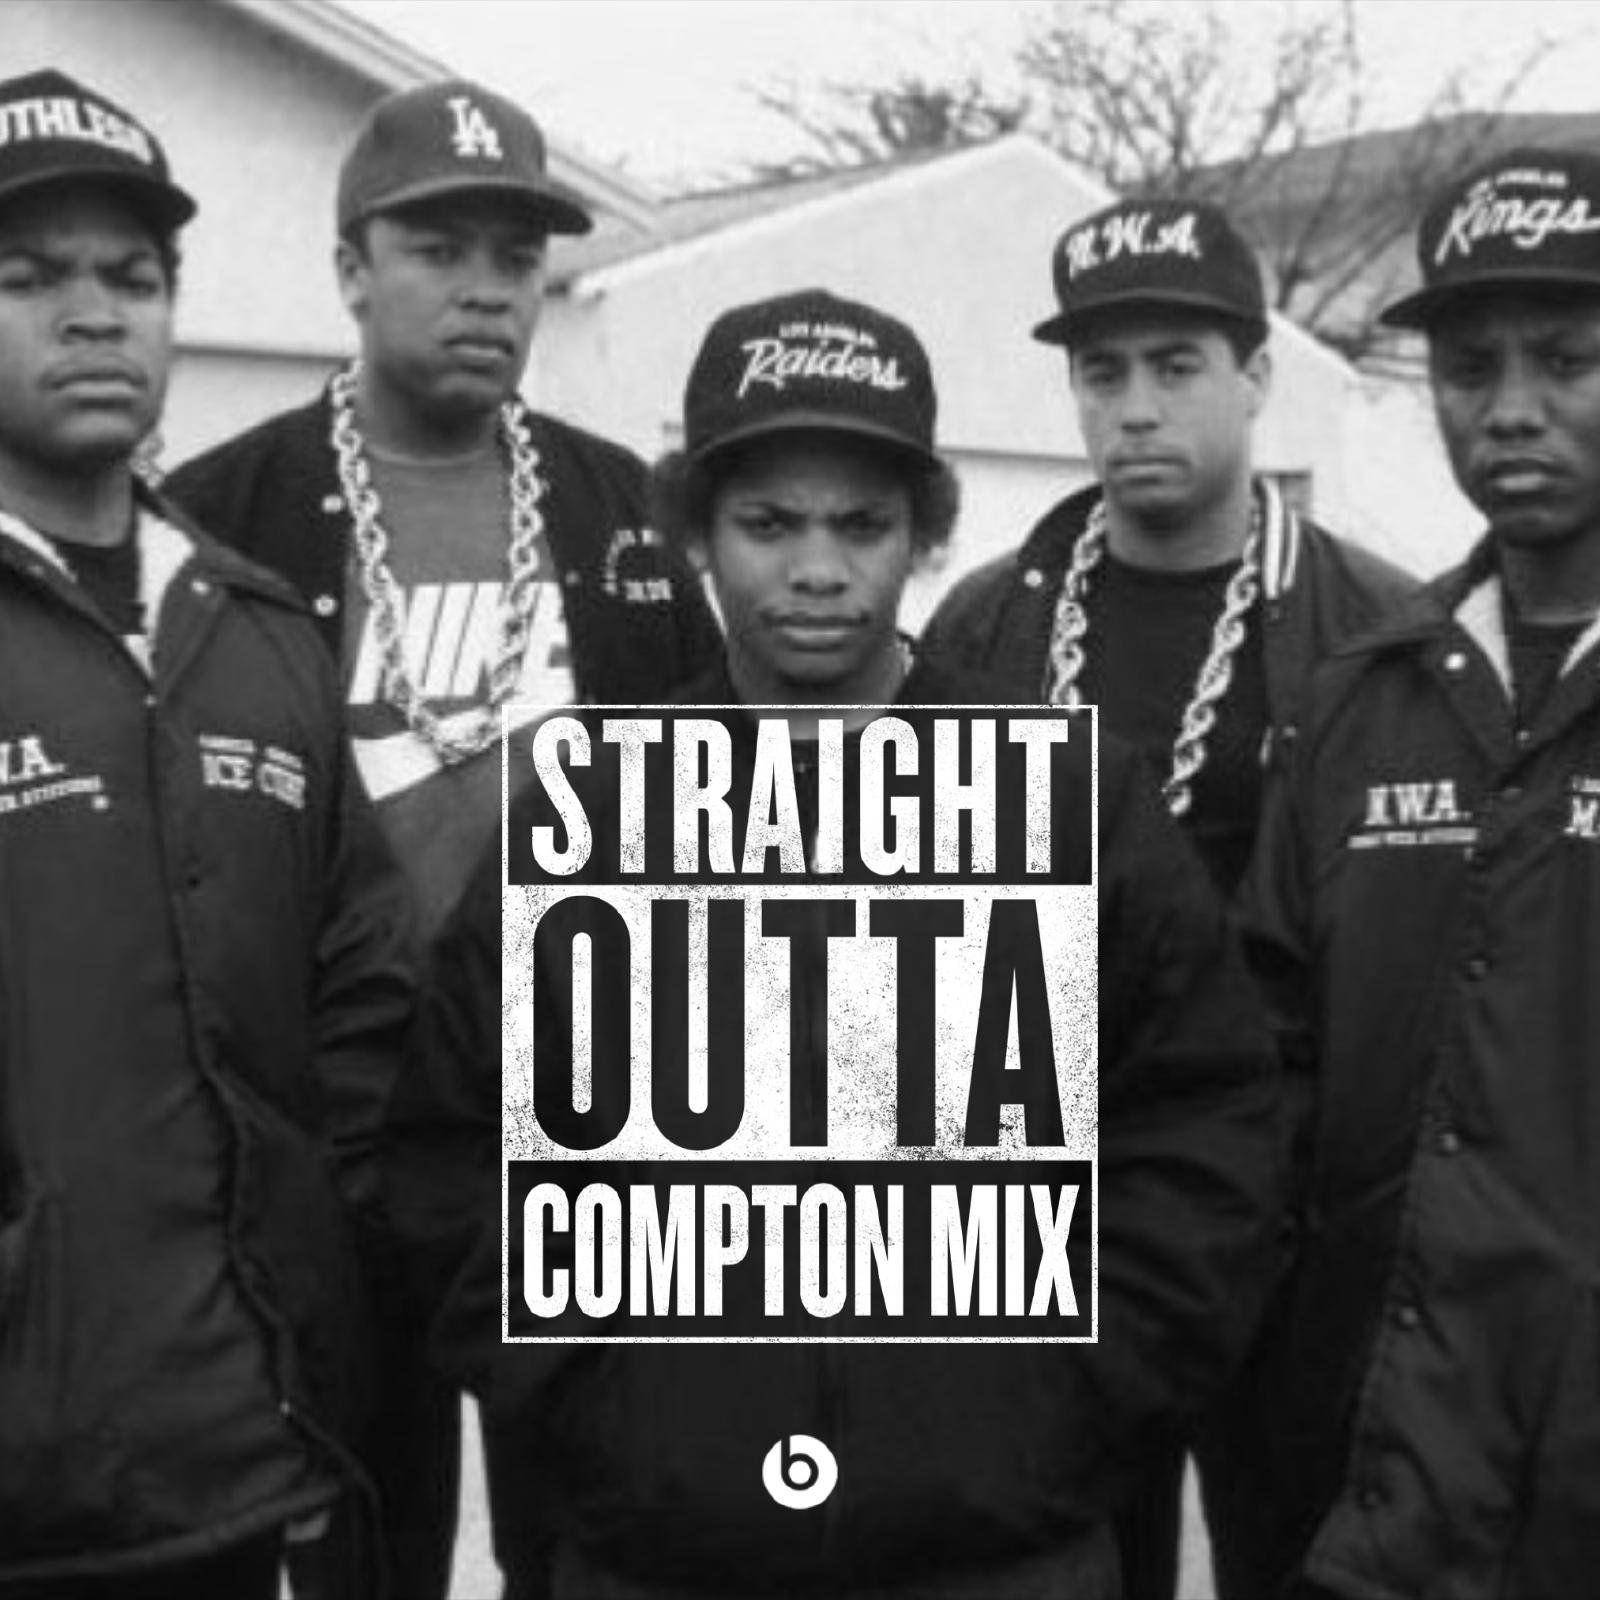 Nw.a. Straight Outta Compton Mix Affisch Wallpaper